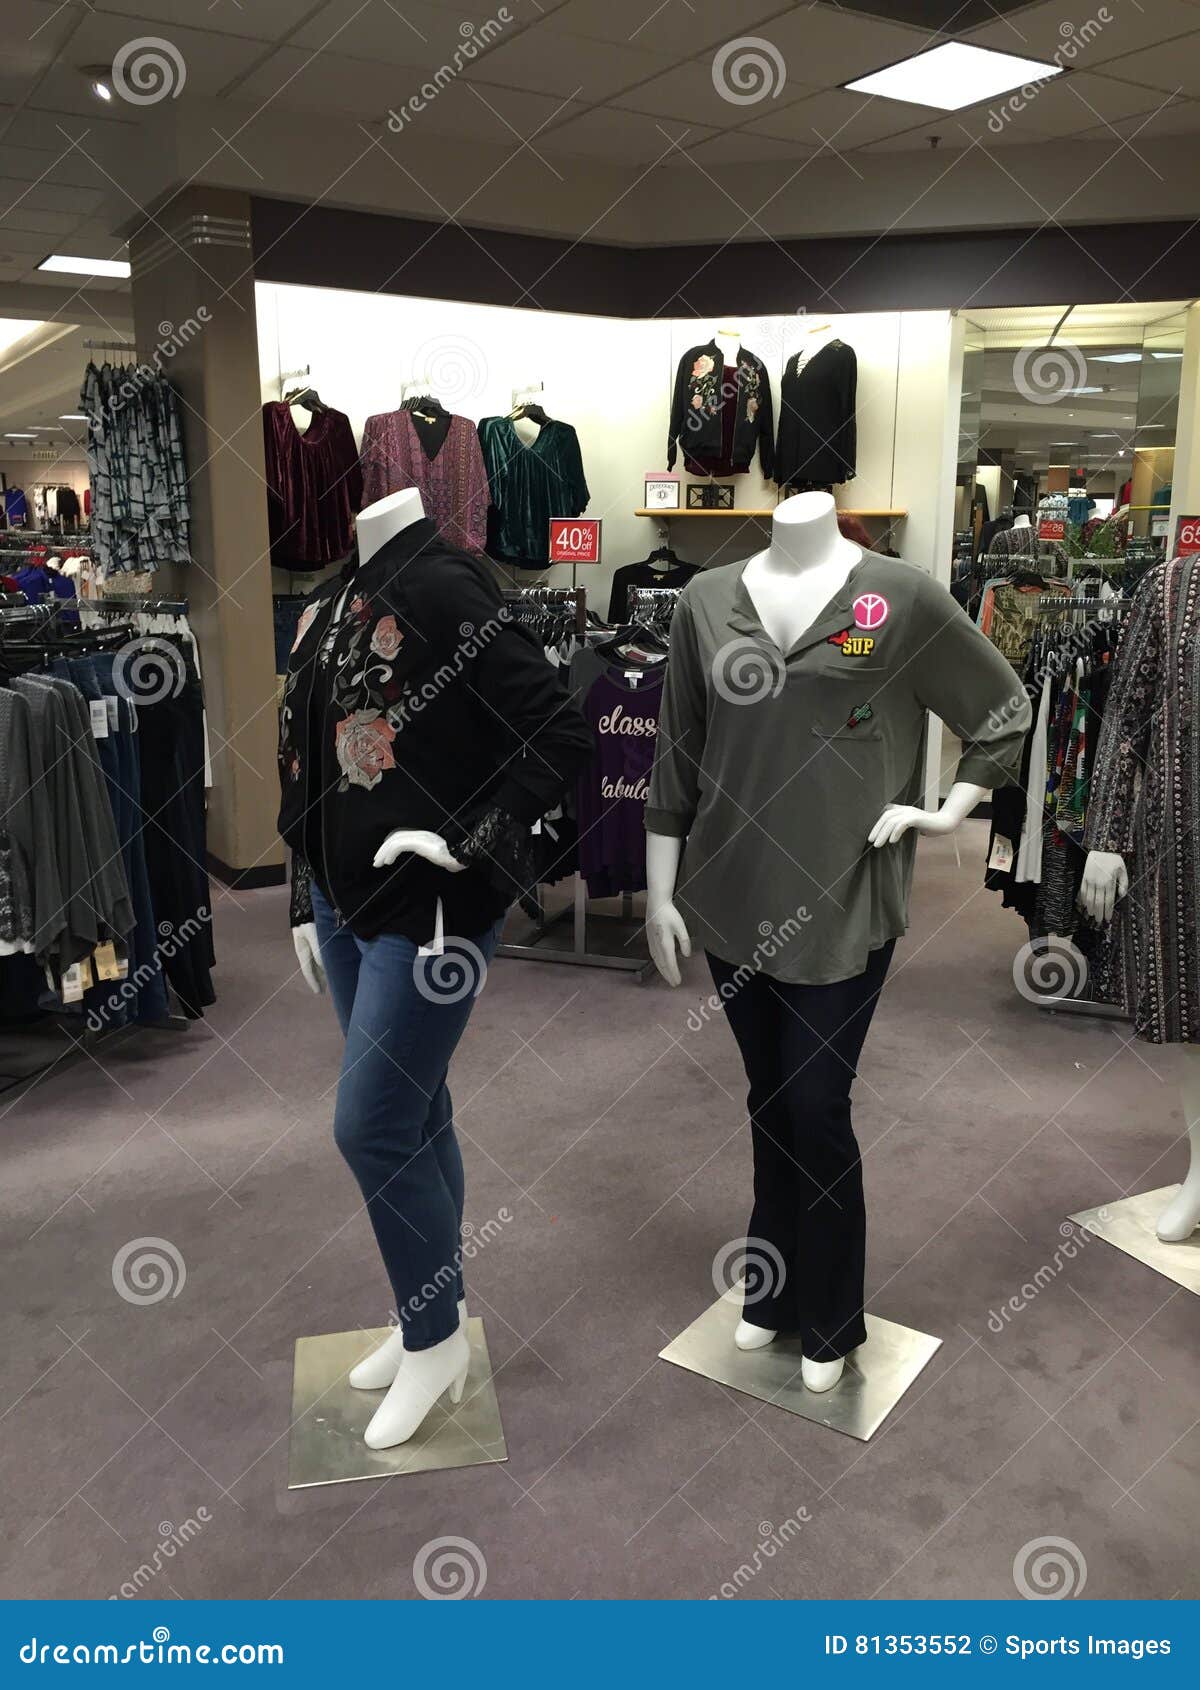 How to dress mannequins in a shopping store: merchandising lessons